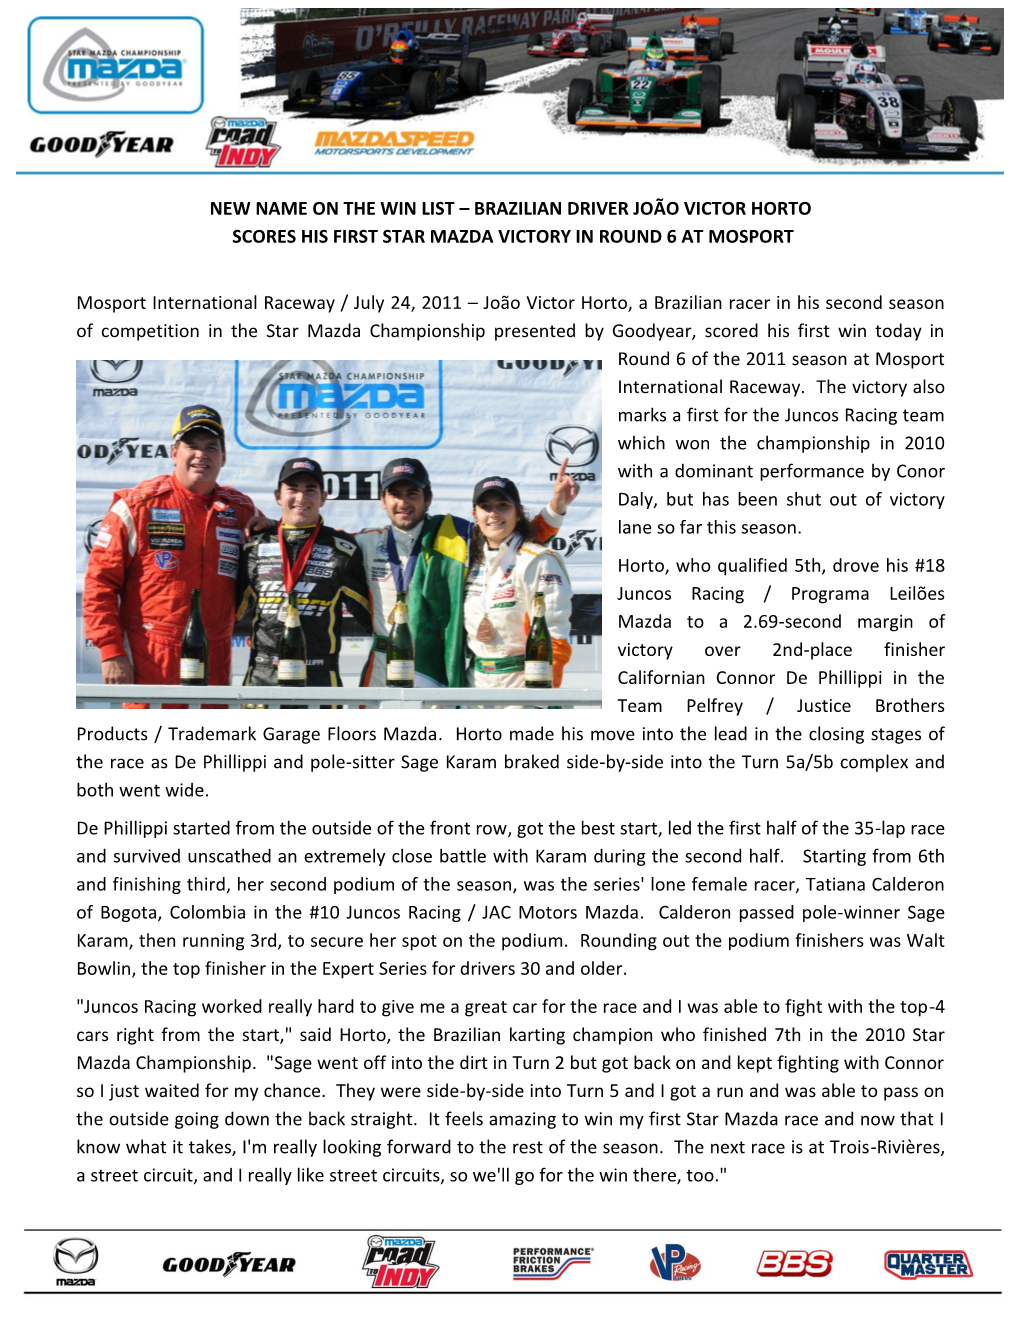 New Name on the Win List – Brazilian Driver João Victor Horto Scores His First Star Mazda Victory in Round 6 at Mosport